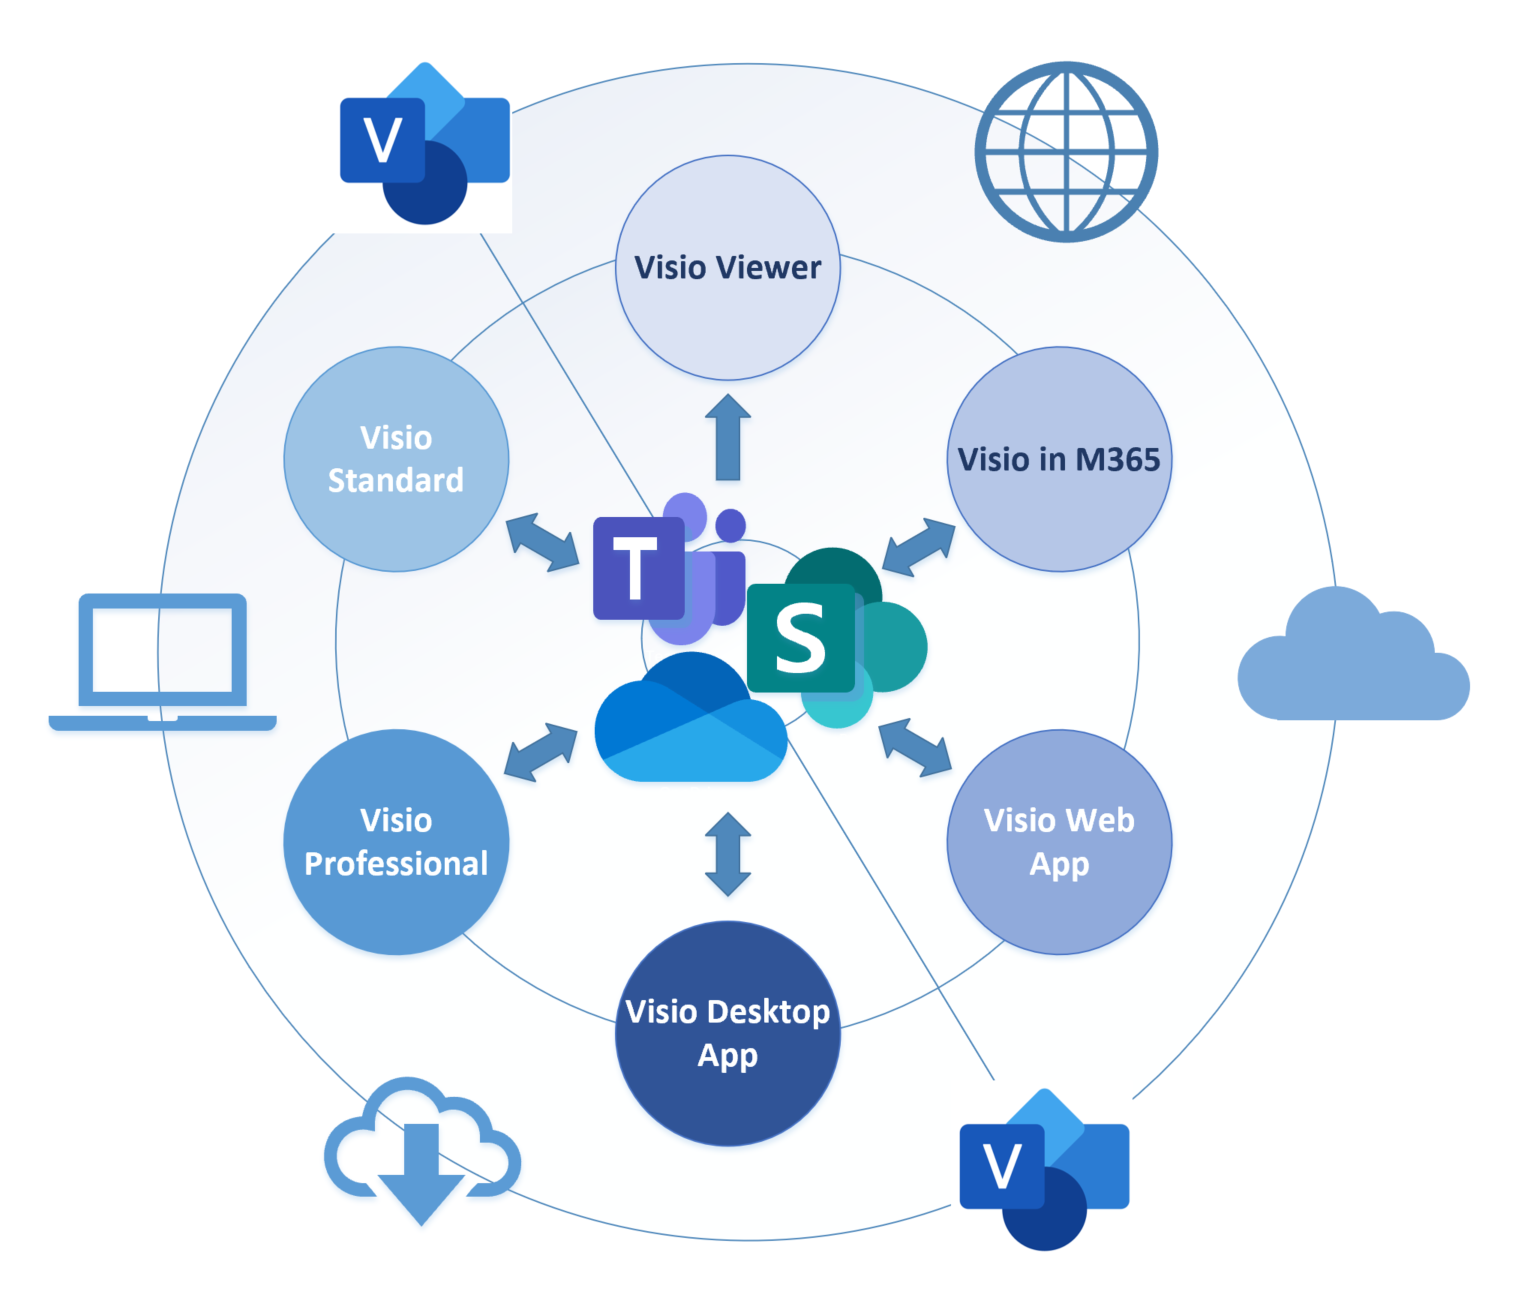 Visio in Microsoft 365? What's that? - bVisual